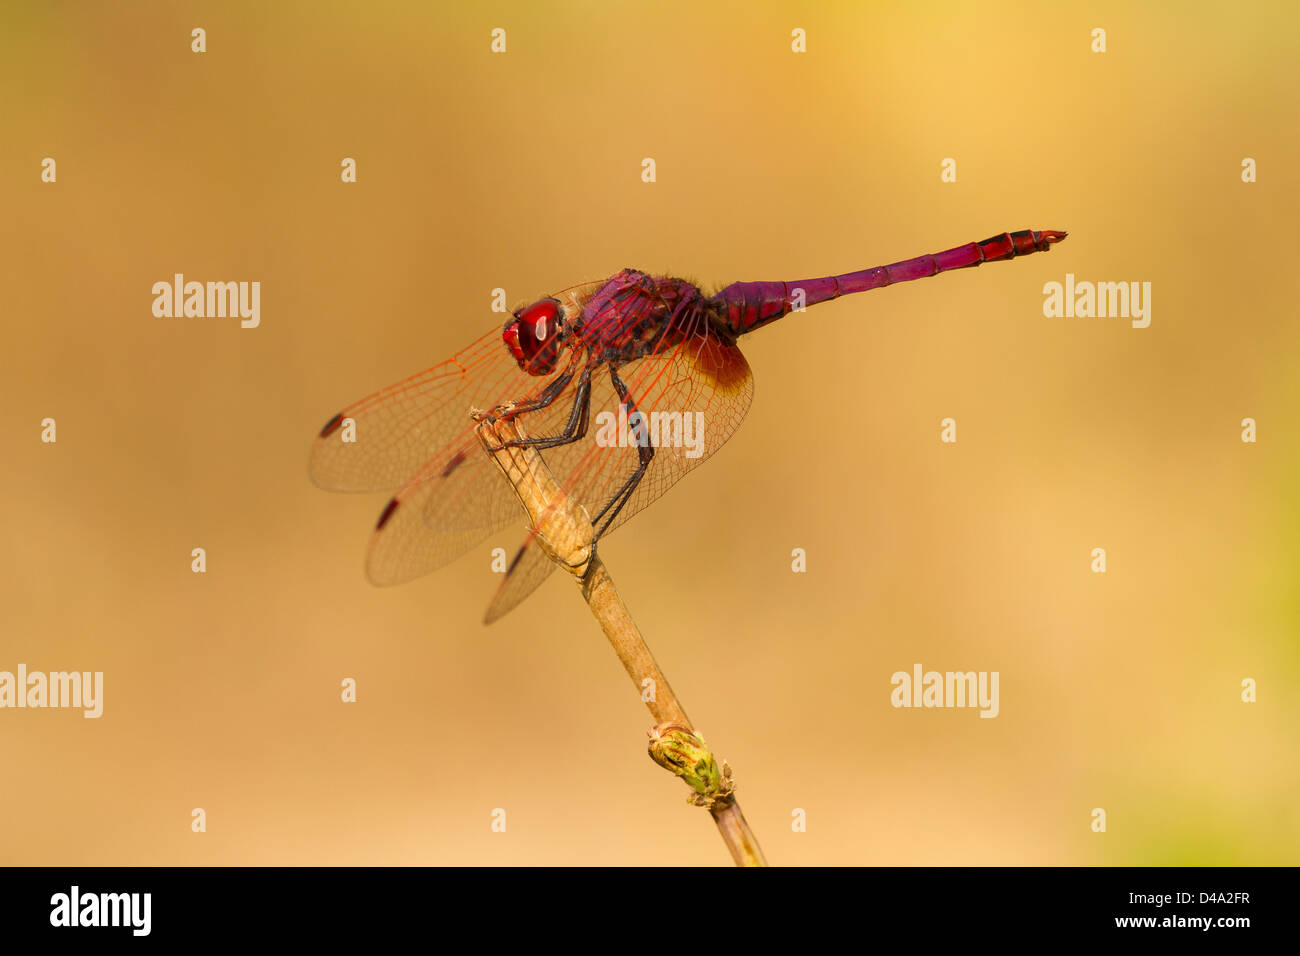 Violet Dropwing Dragonfly on a perch with brown background Stock Photo